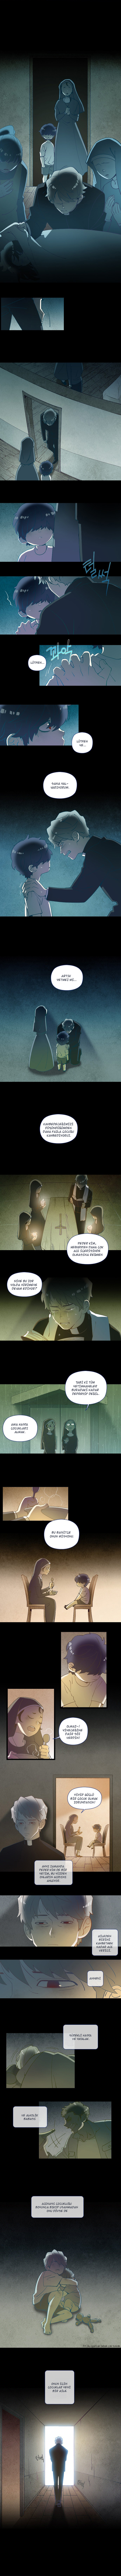 Ghost Teller: Chapter 09 - Page 4